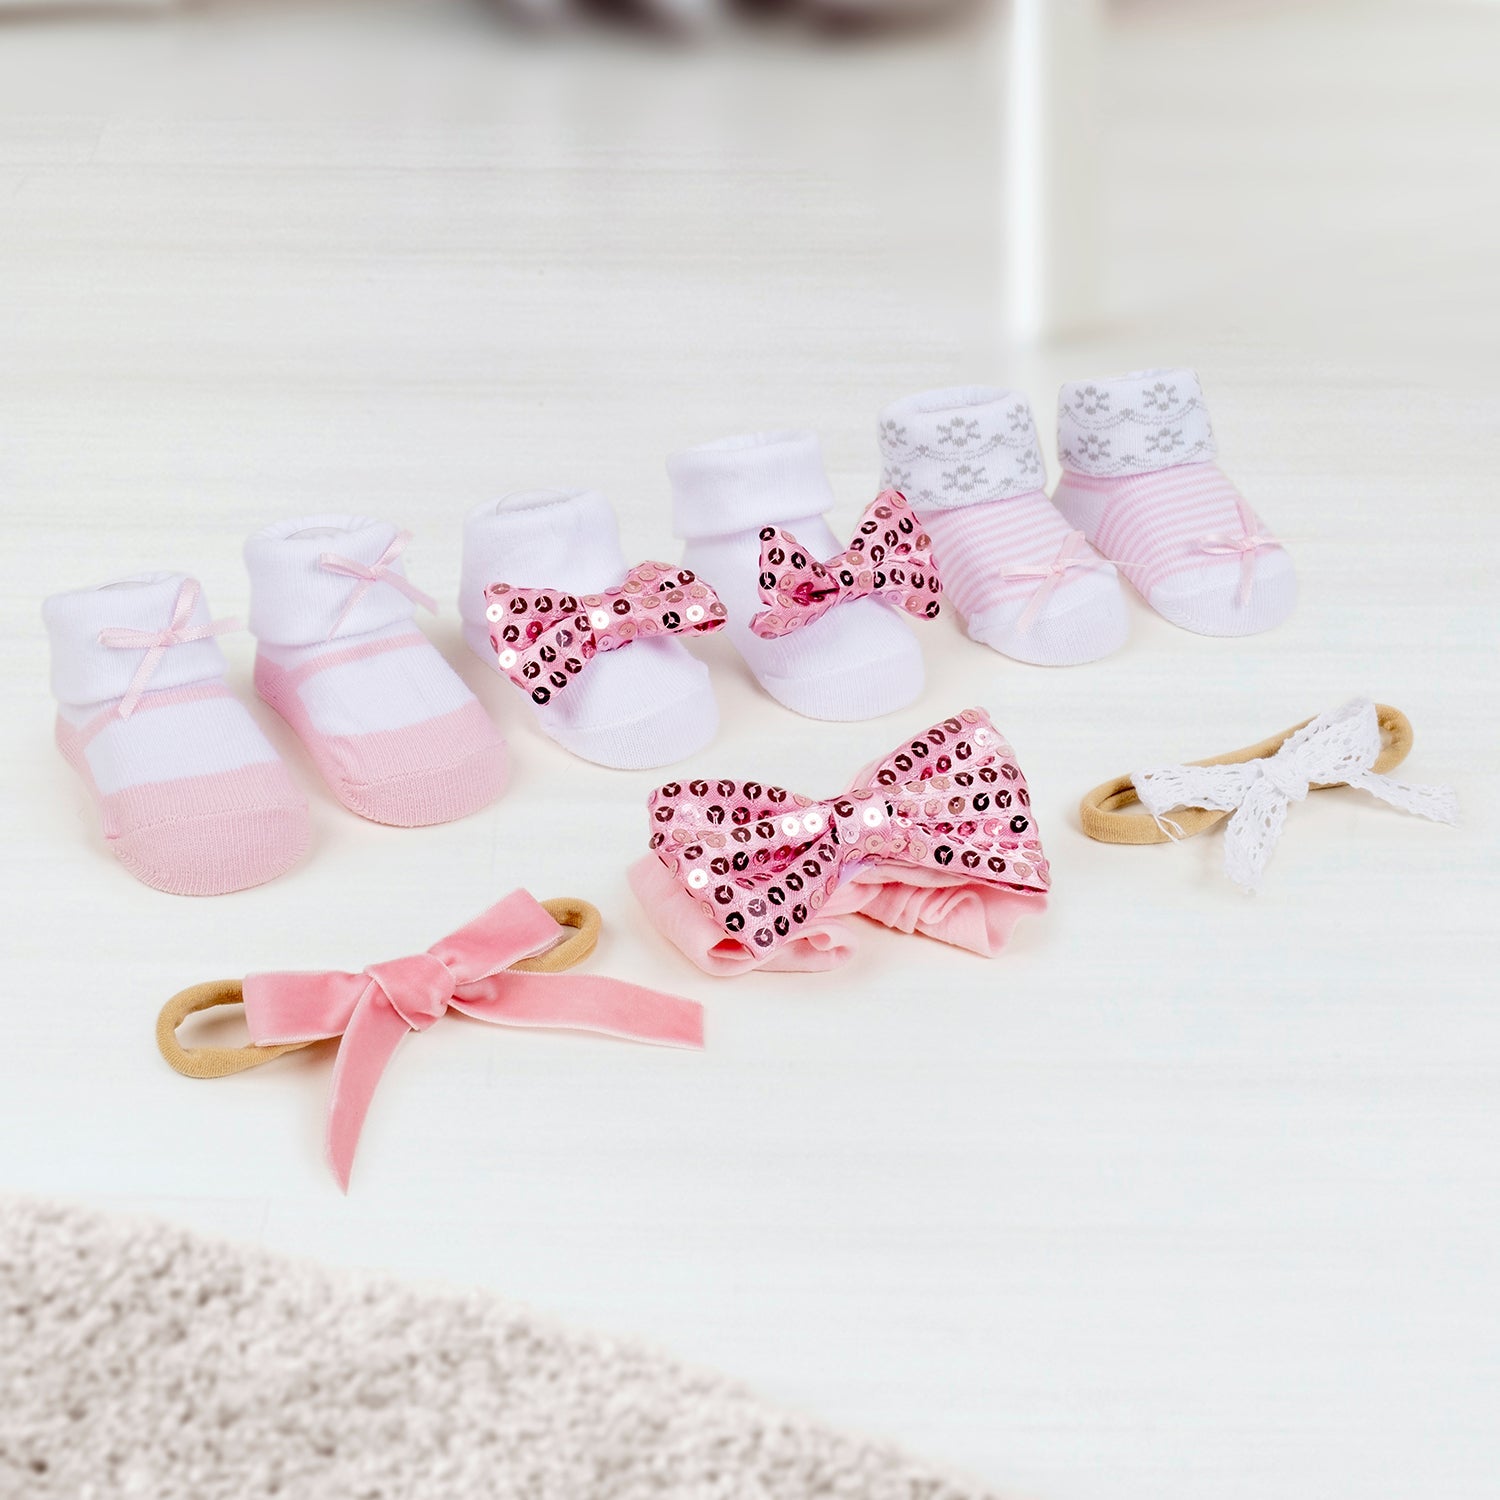 Baby Moo Sequined Infant Girl 6-Piece Gift Hairband And Socks Set - Pink